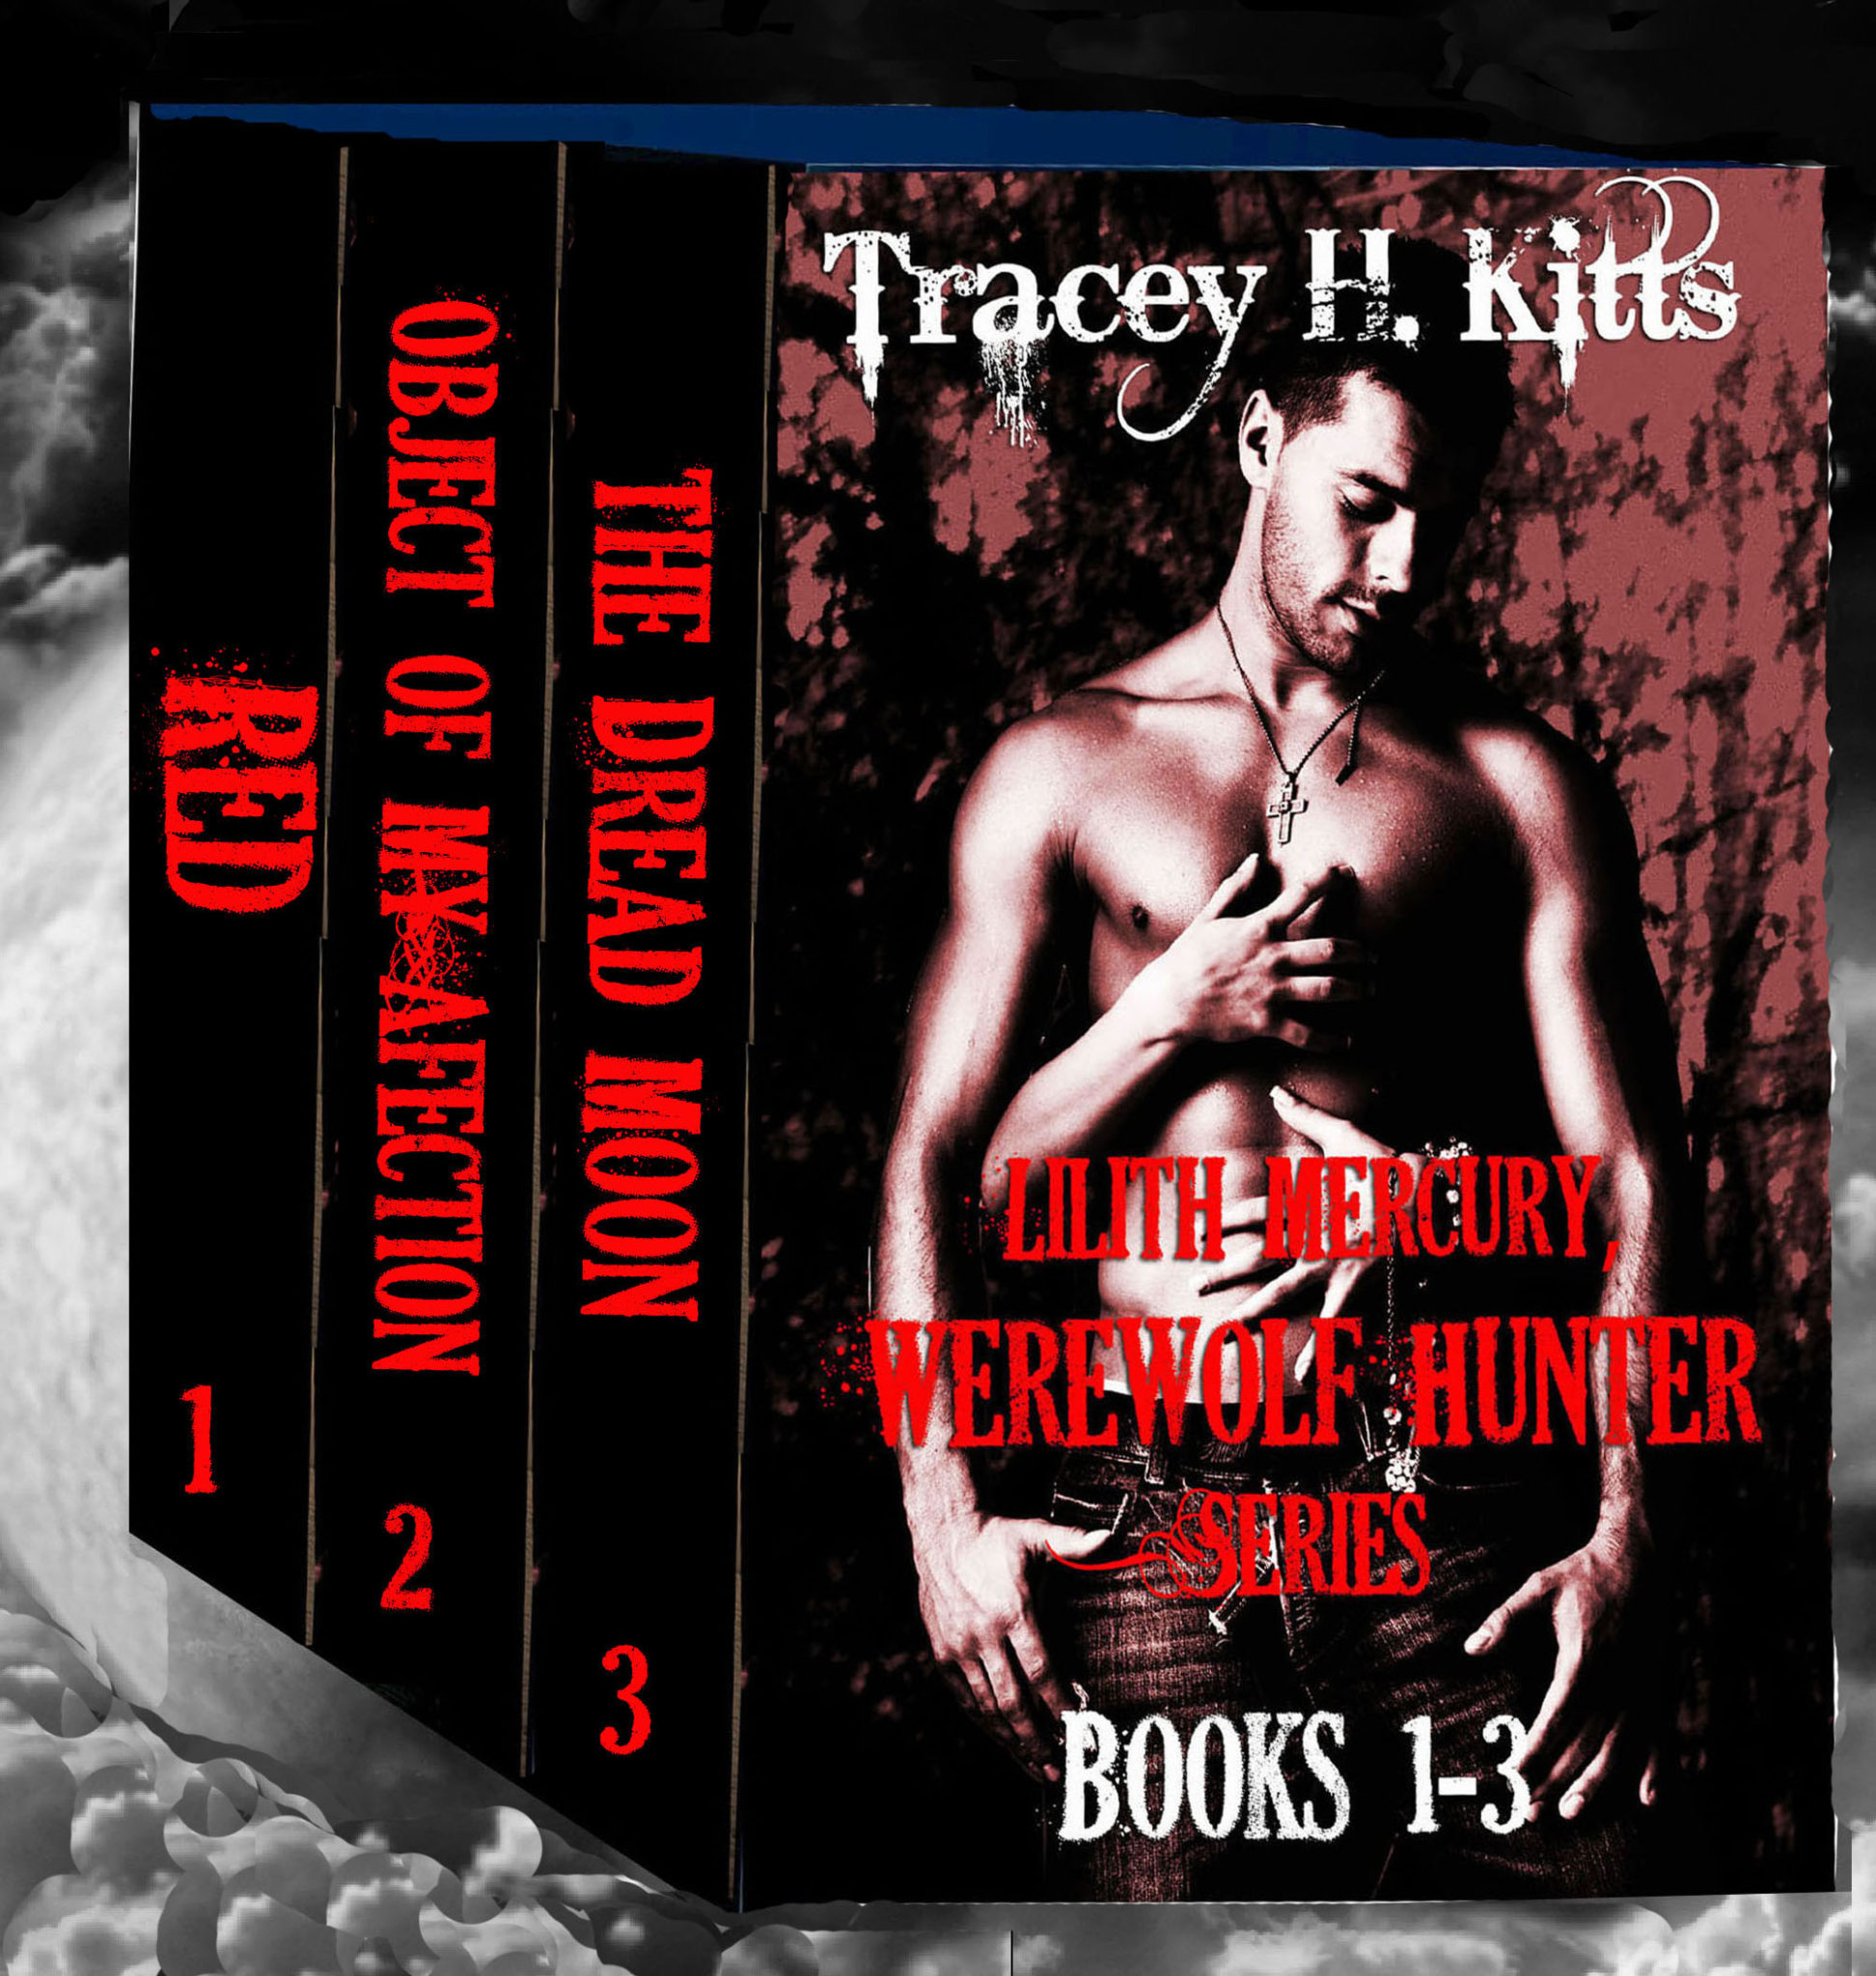 FREE: Lilith Mercury, Werewolf Hunter Series (Boxed Set, Books 1-3) by Tracey H. Kitts